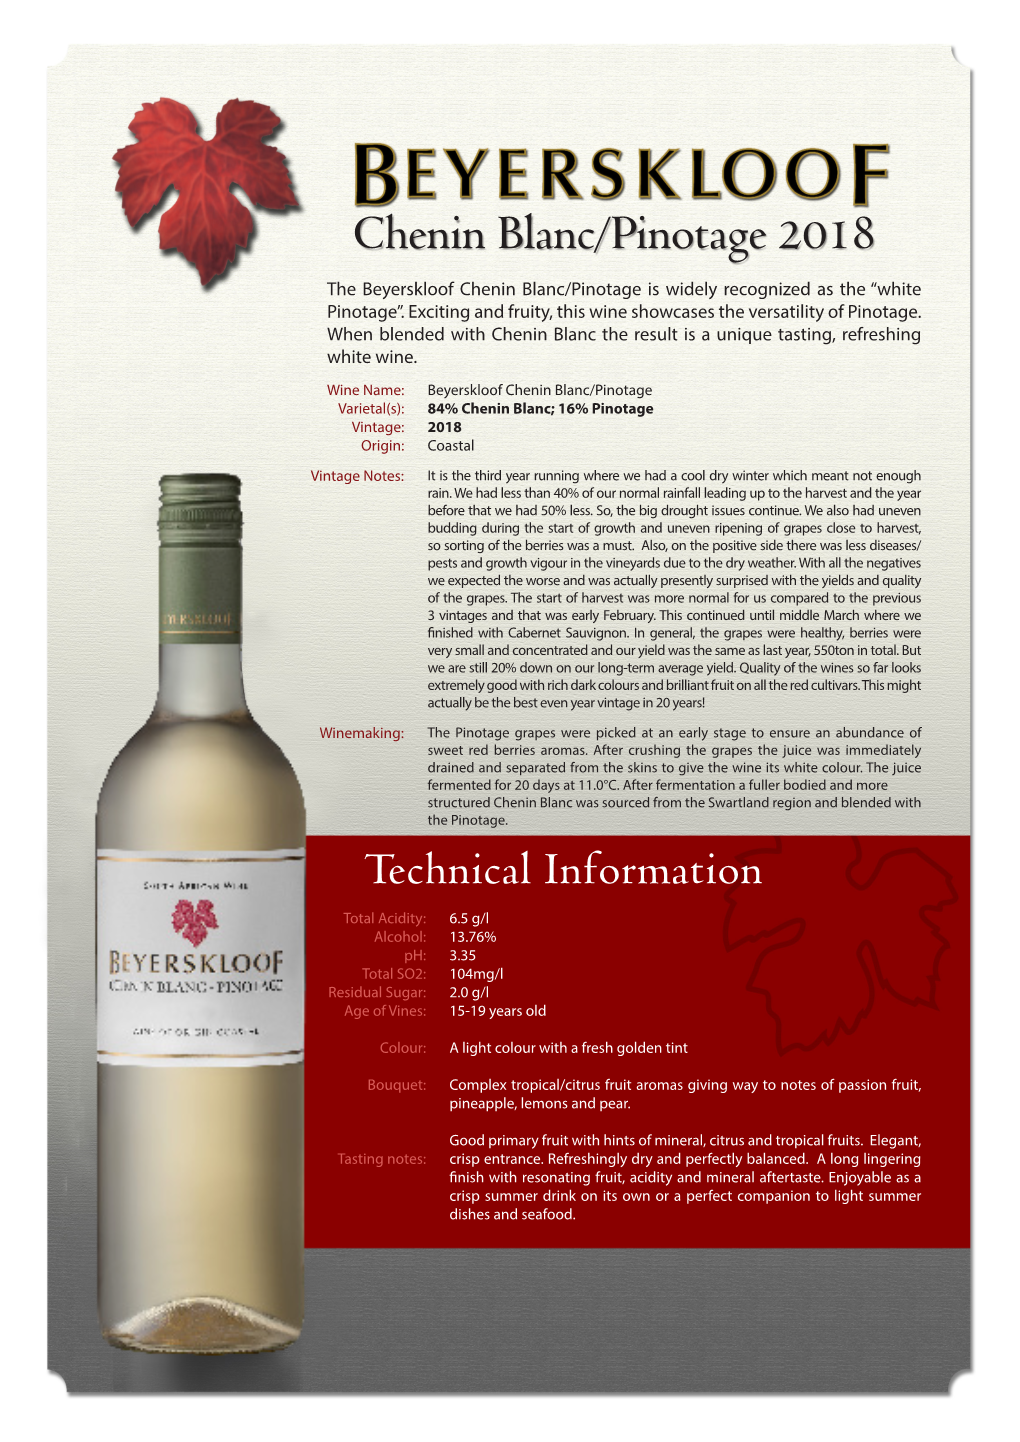 Chenin Blanc/Pinotage 2018 the Beyerskloof Chenin Blanc/Pinotage Is Widely Recognized As the “White Pinotage”